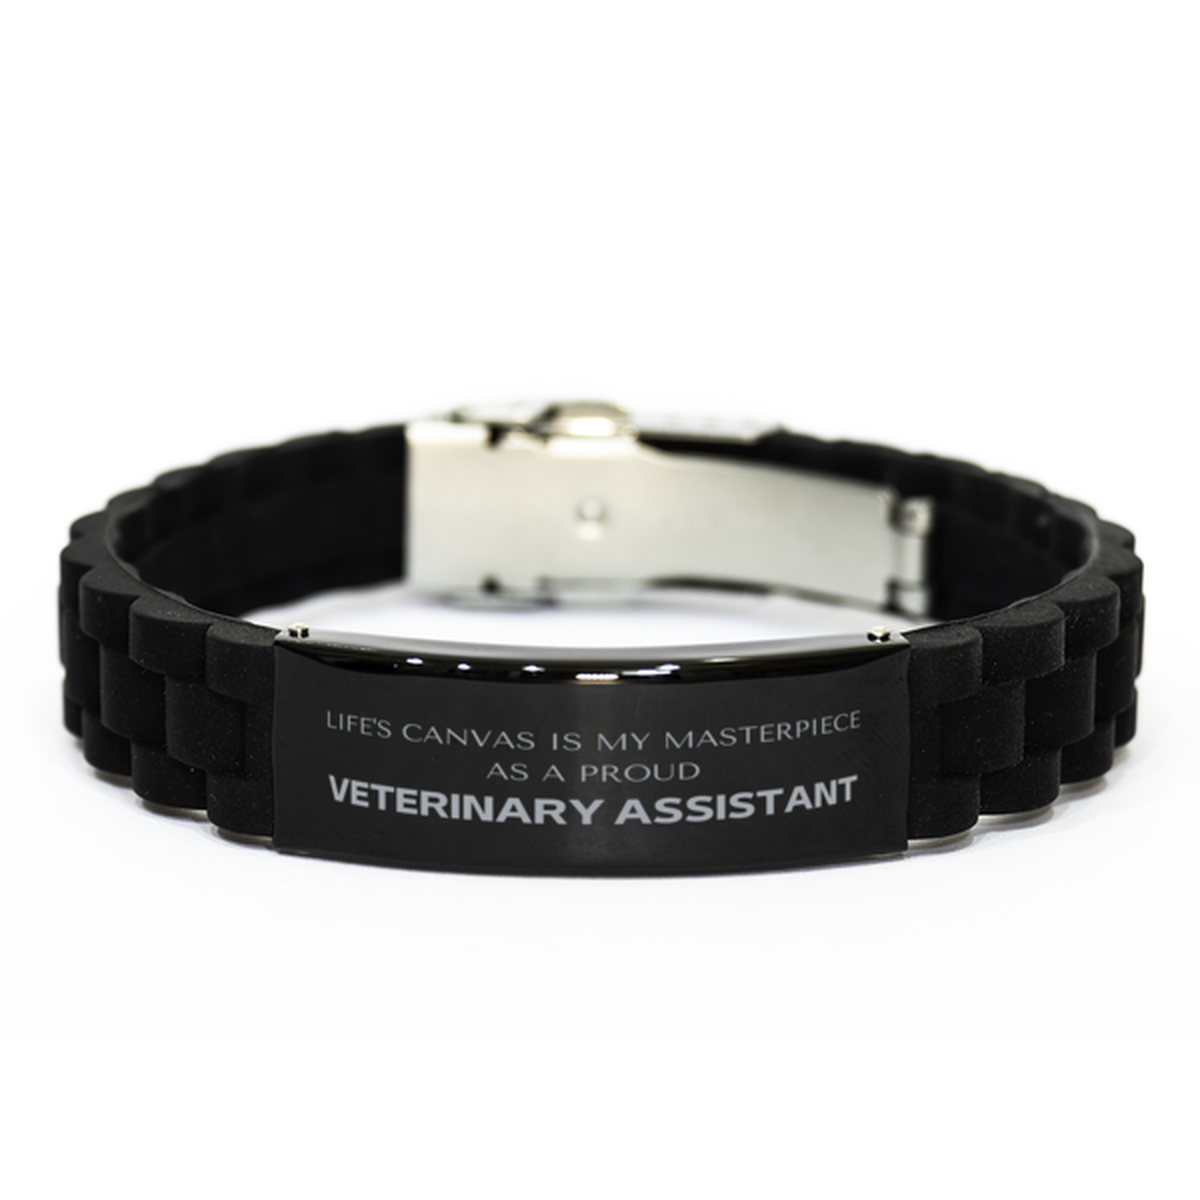 Proud Veterinary Assistant Gifts, Life's canvas is my masterpiece, Epic Birthday Christmas Unique Black Glidelock Clasp Bracelet For Veterinary Assistant, Coworkers, Men, Women, Friends